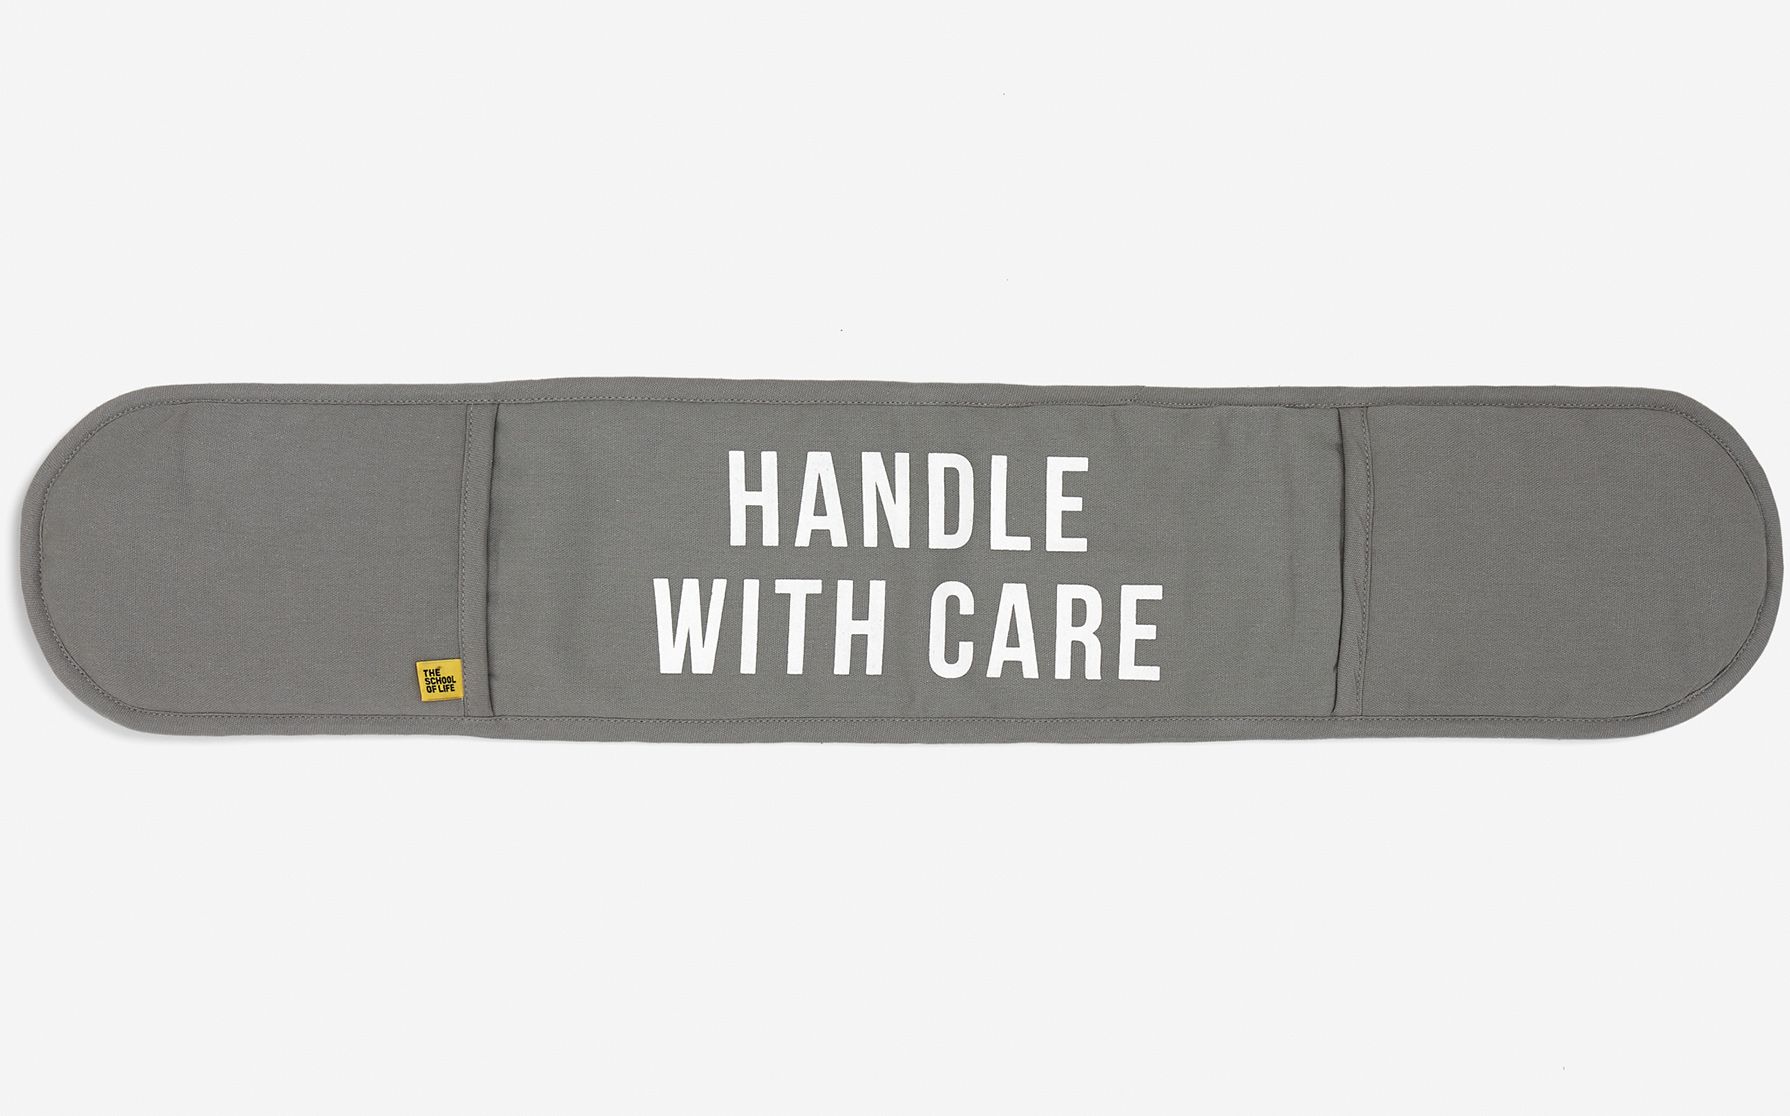 Handle with care oven glove